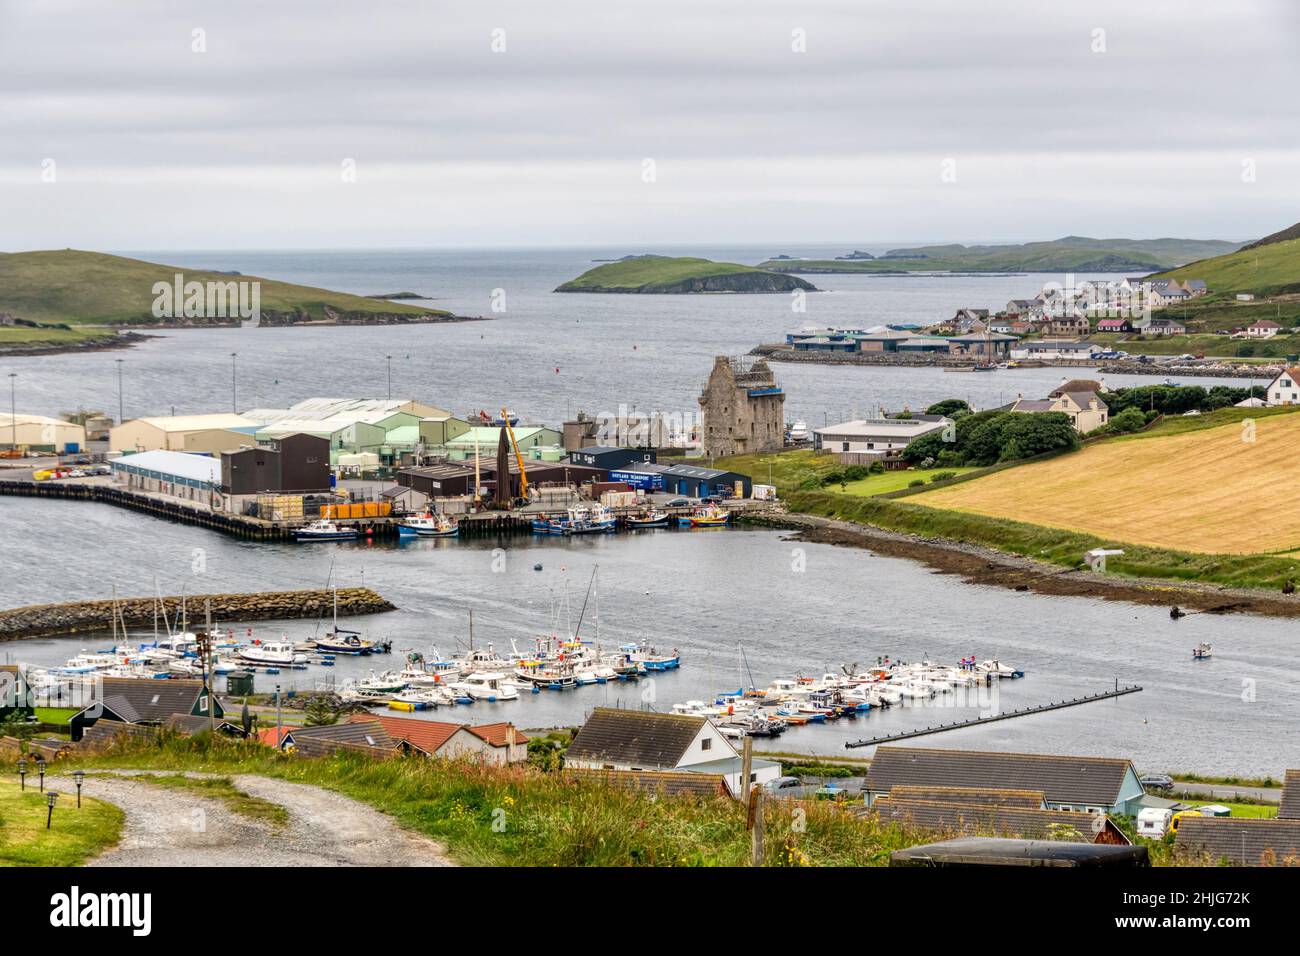 The town of Scalloway on Mainland Shetland, with the ruined keep of the castle in the middle distance. Stock Photo